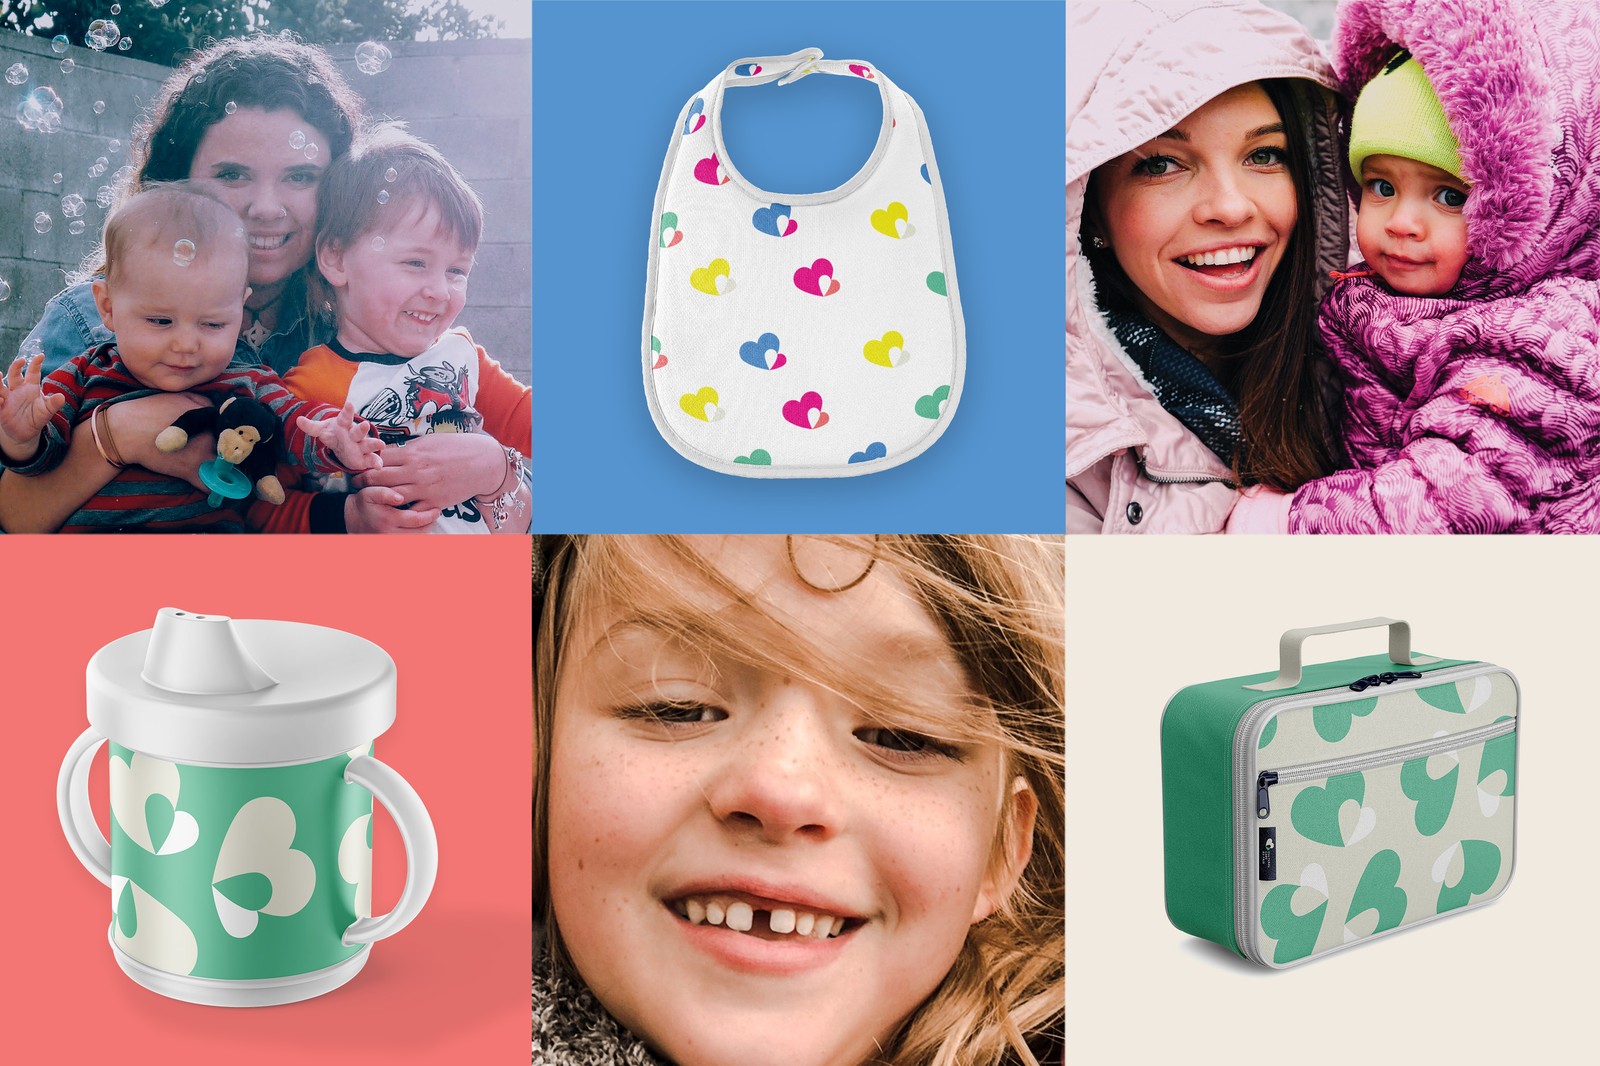 Merchandising for babies and small children utilising the logo pattern